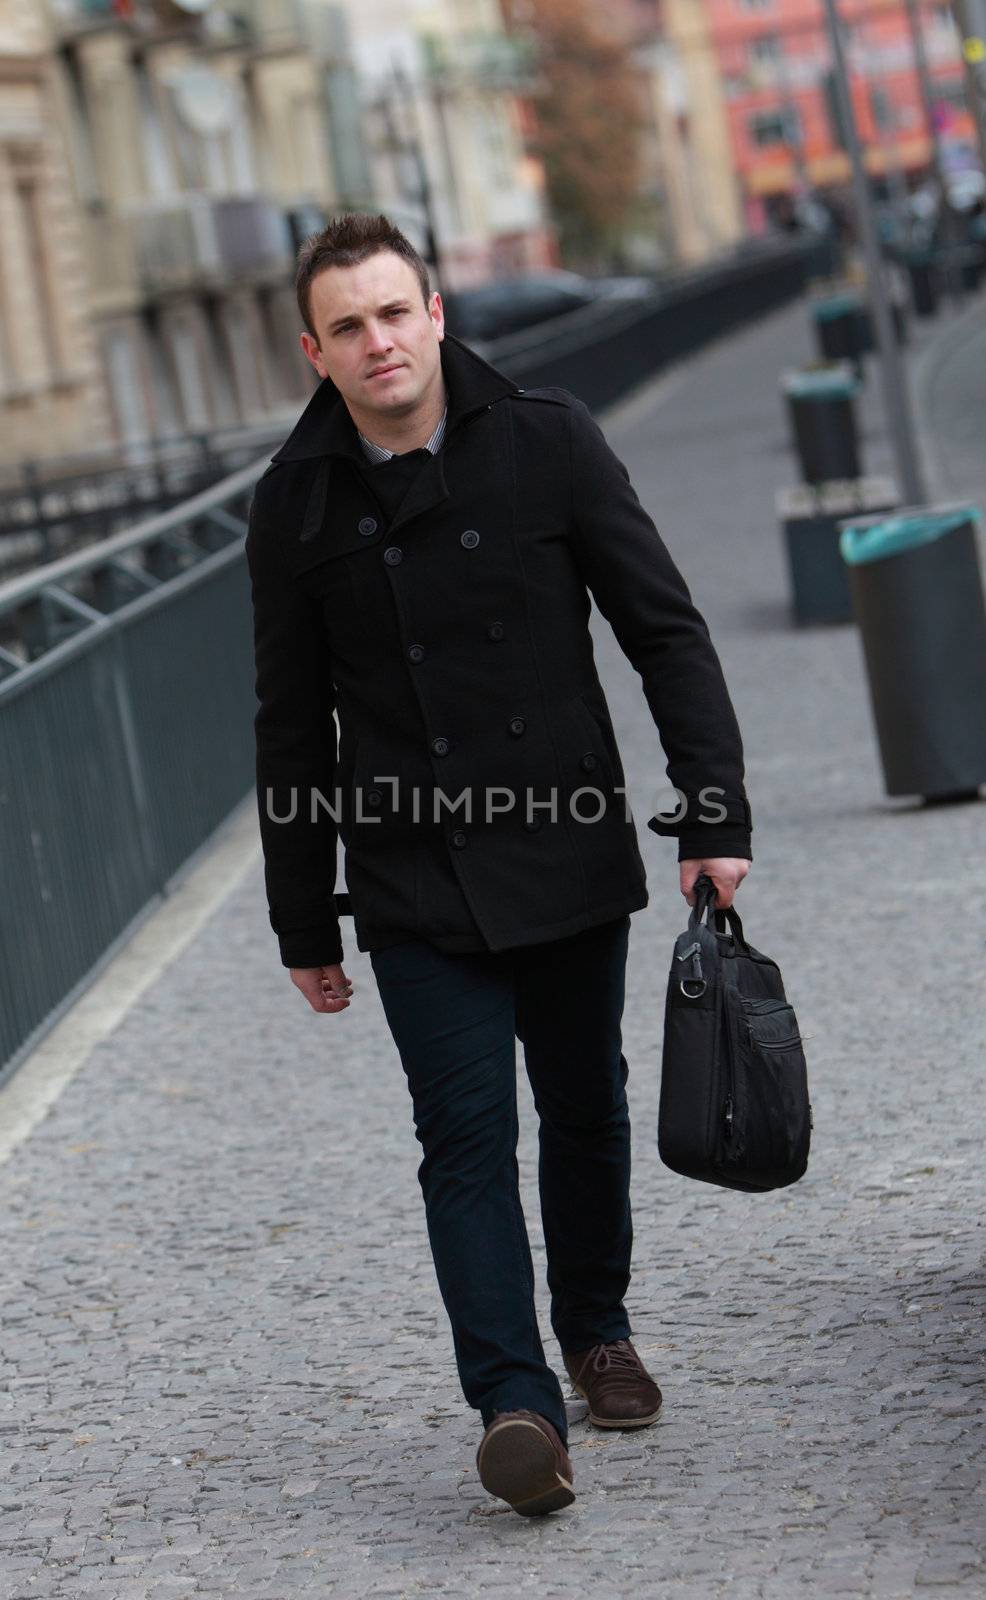 Image of a young businessman walking in cobbled street in a city.